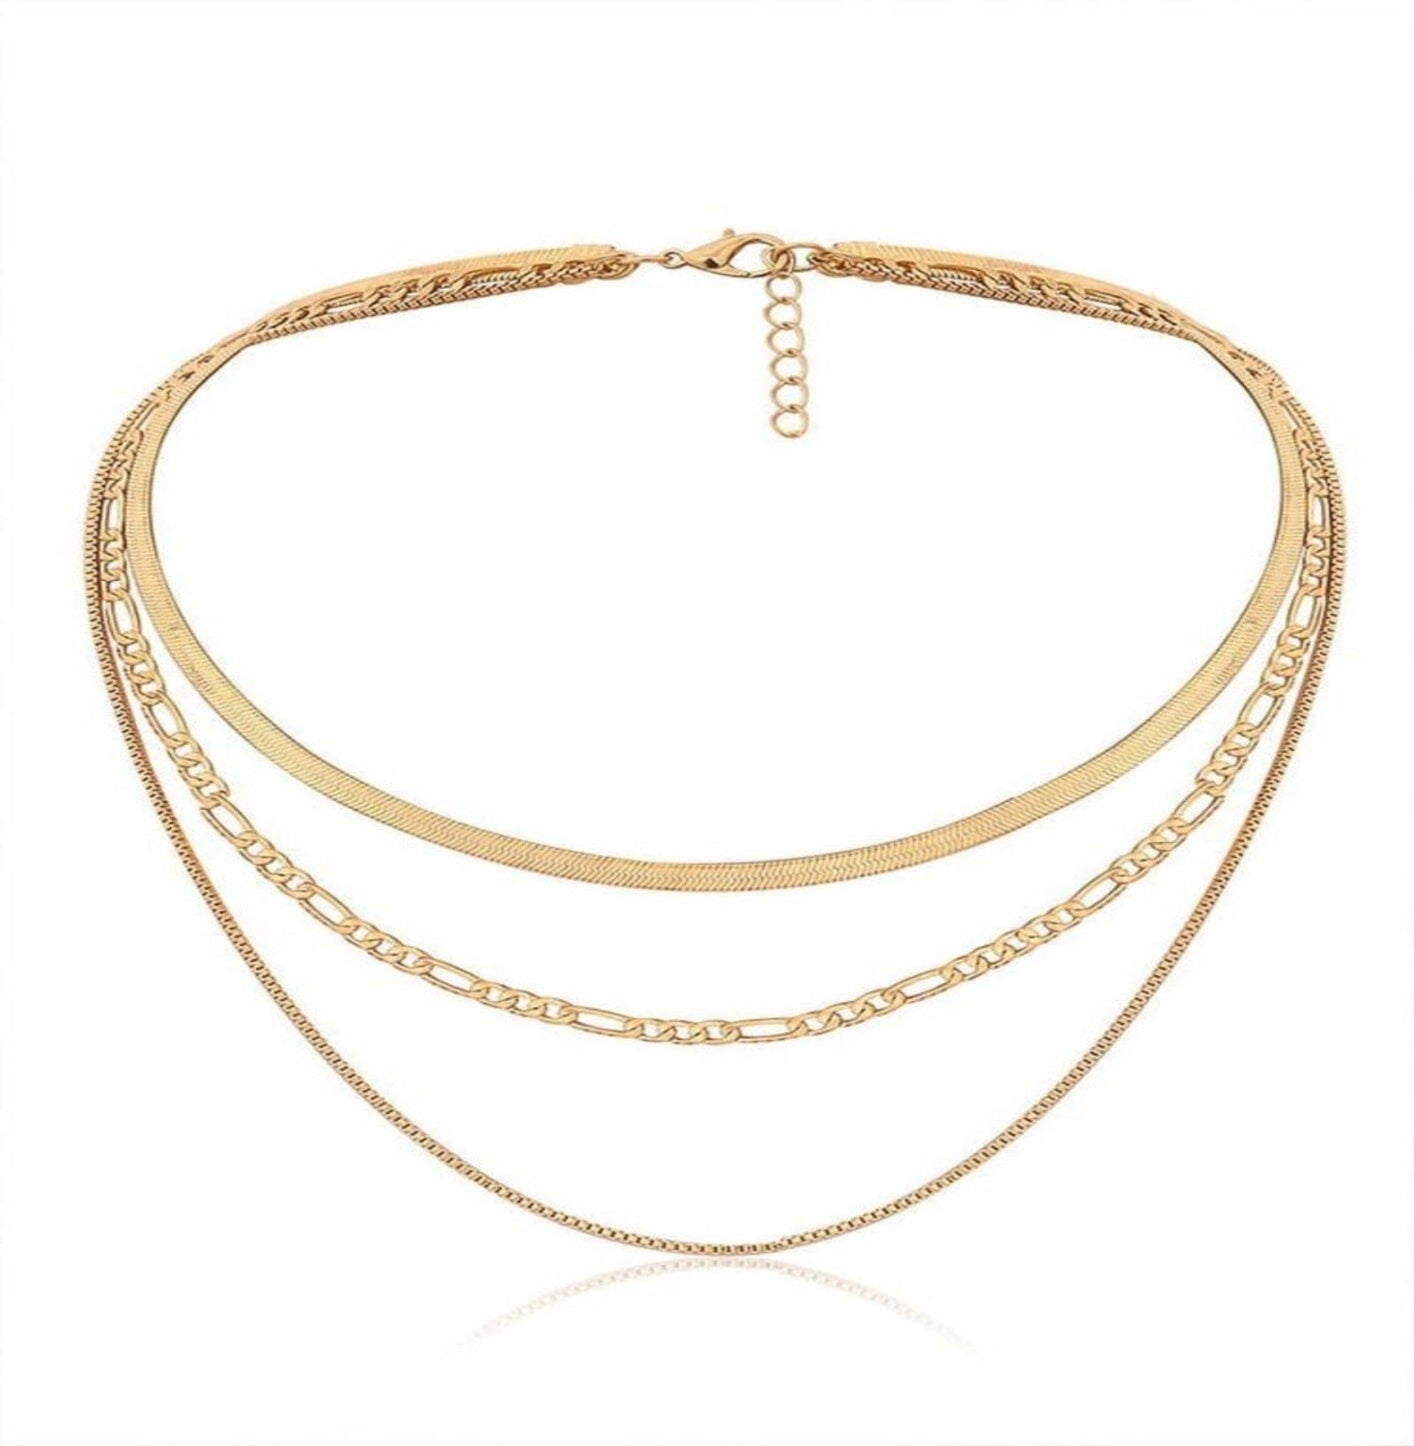 MOCCA NECKLACE neck Yubama Jewelry Online Store - The Elegant Designs of Gold and Silver ! 